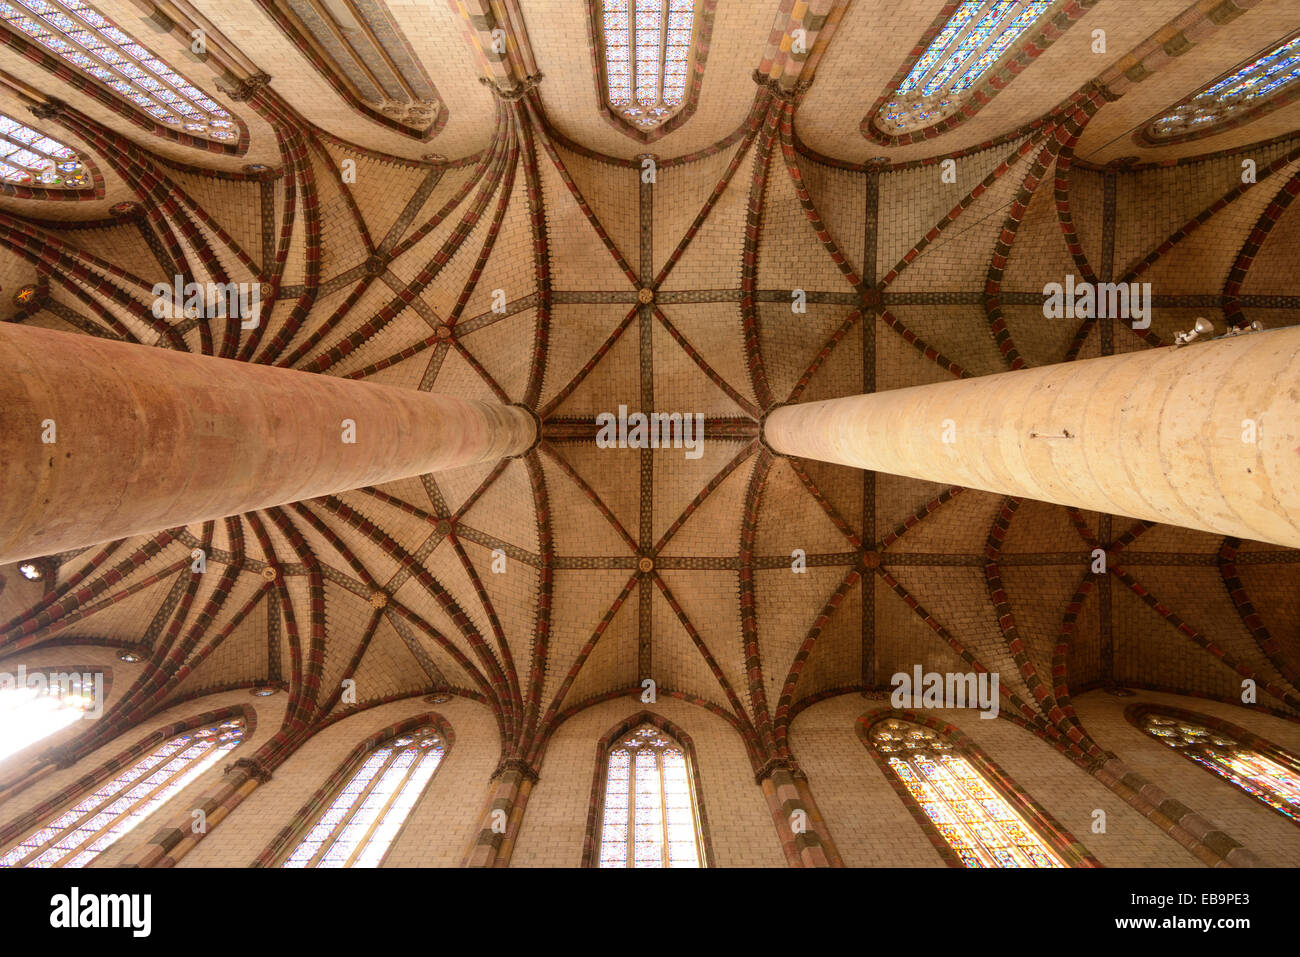 Ribbed Gothic or Romanesque Ceiling of the Church of the Jacobins, Jacobins Church or Monastery (1230) Toulouse France Stock Photo